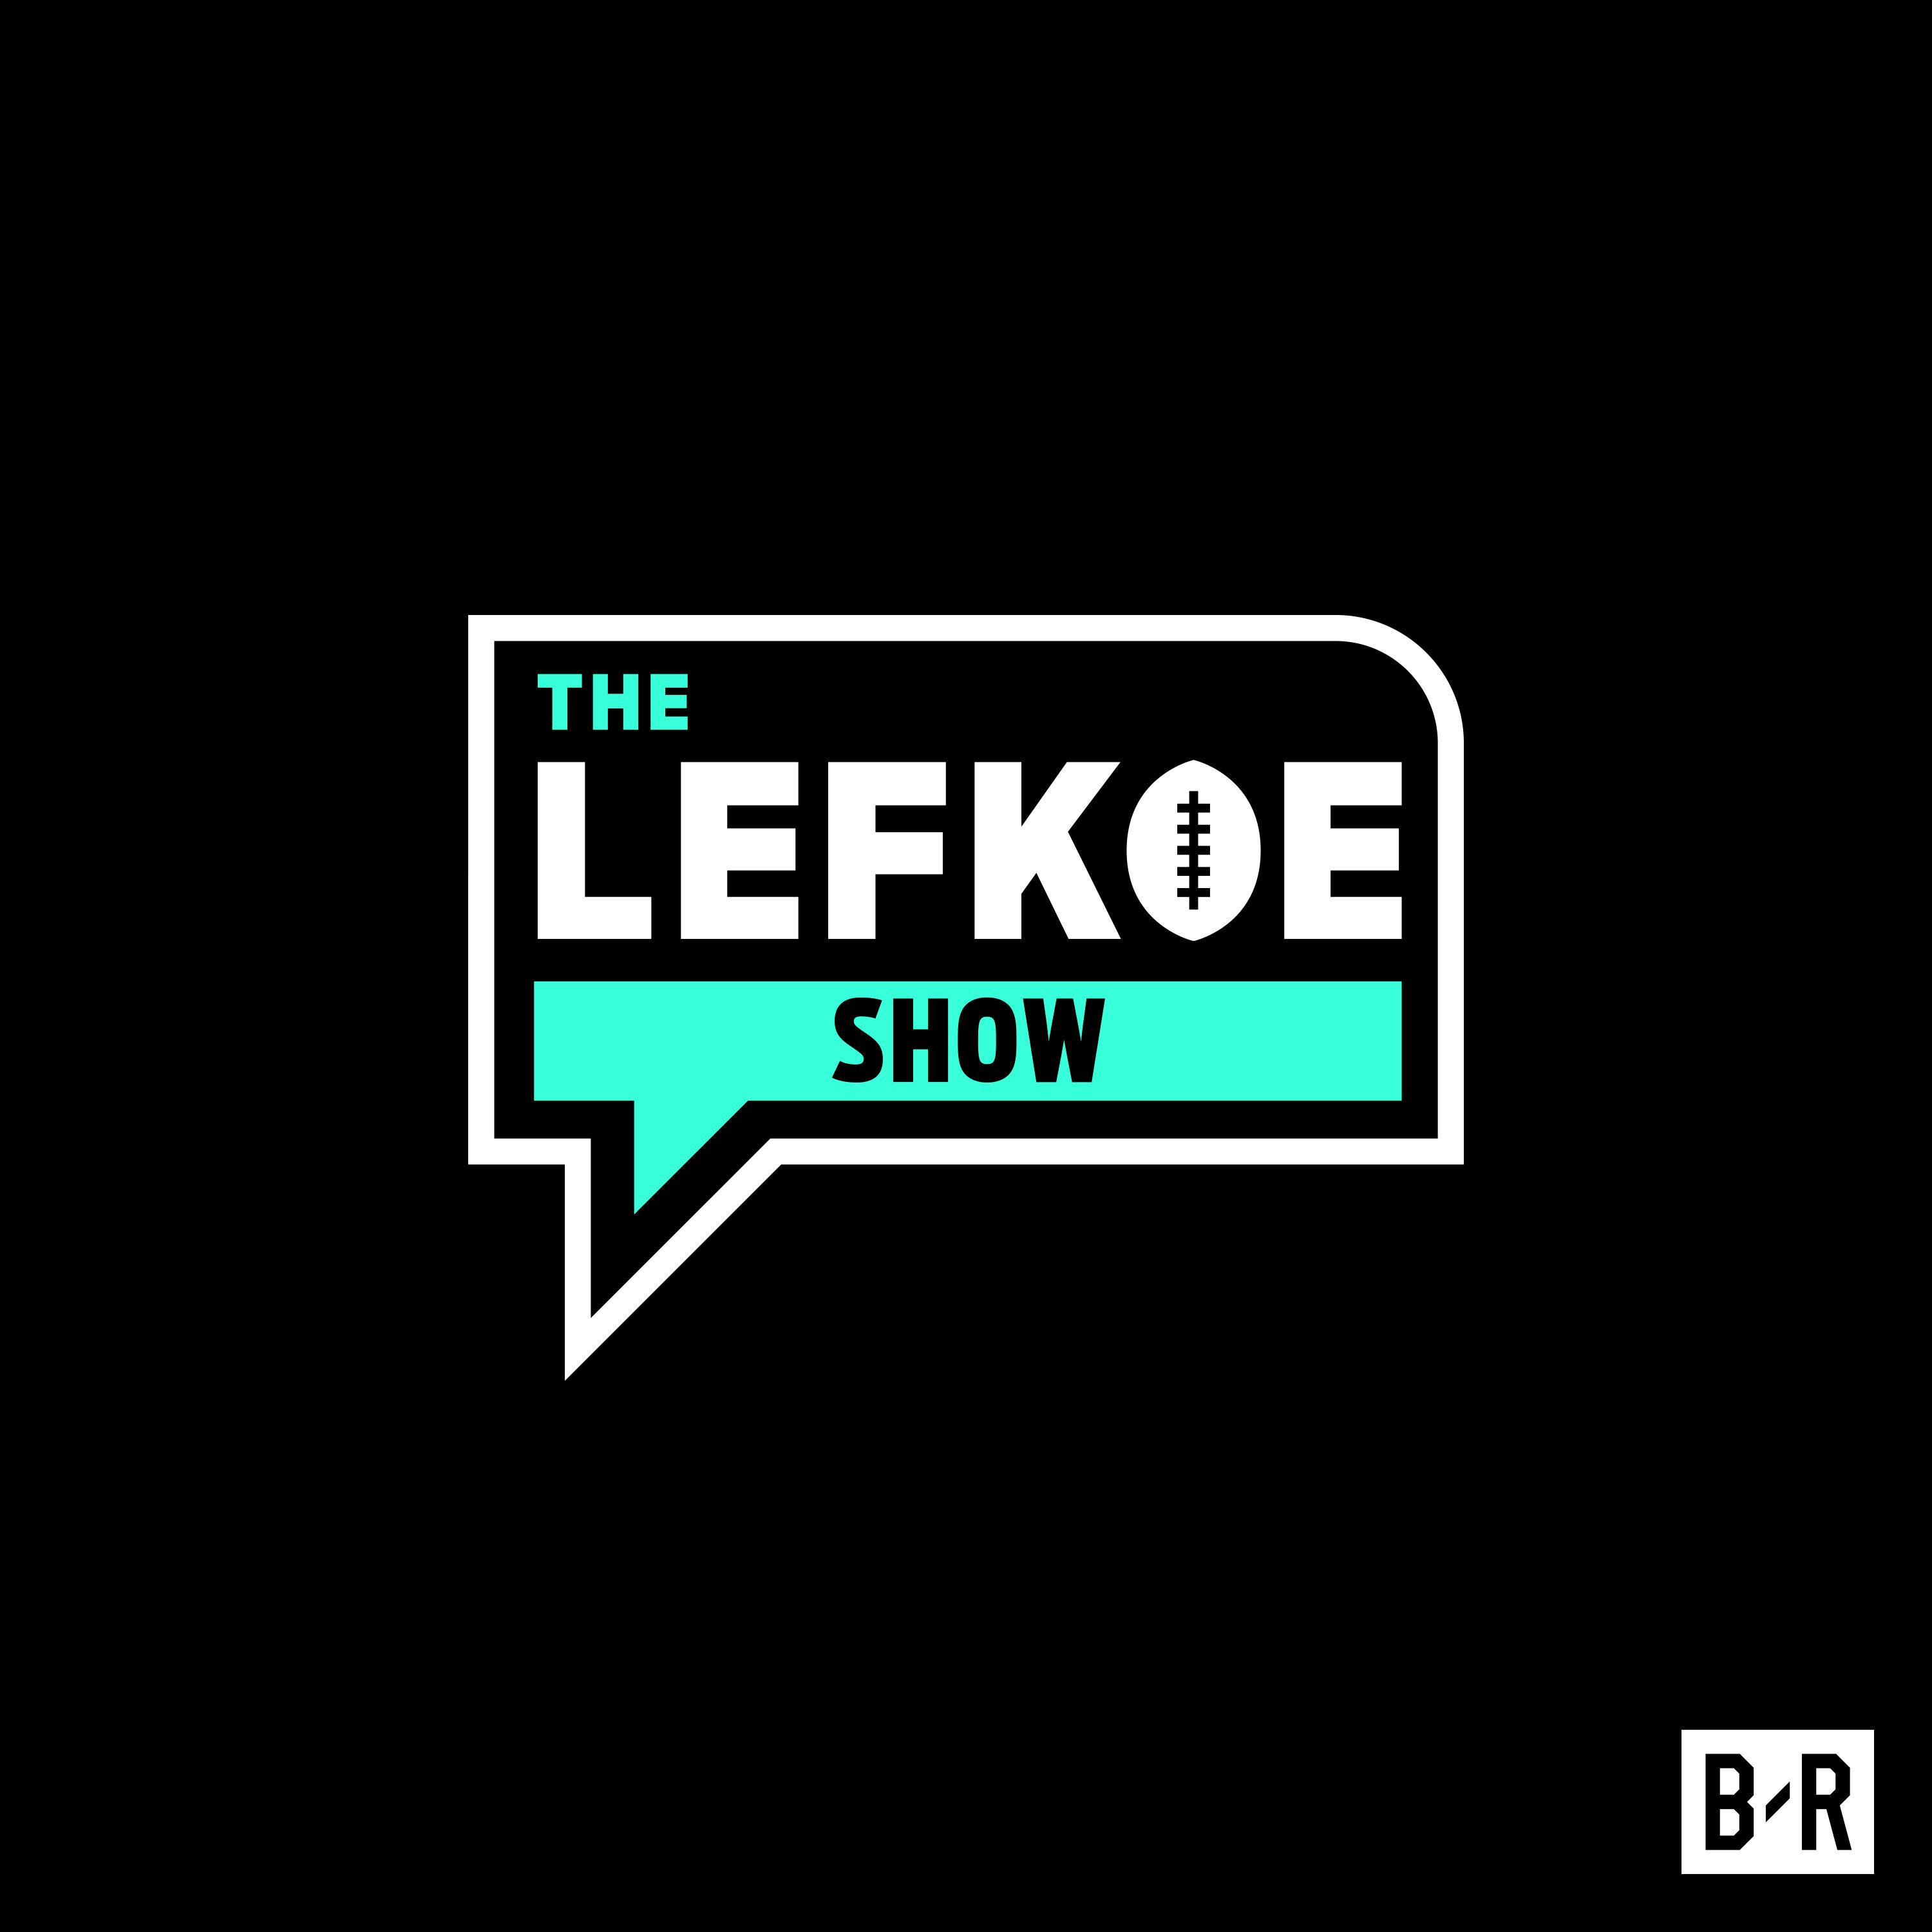 Matthew Berry on Sexy Fantasy Picks, and Boring Old Good Picks | The Lefkoe Show